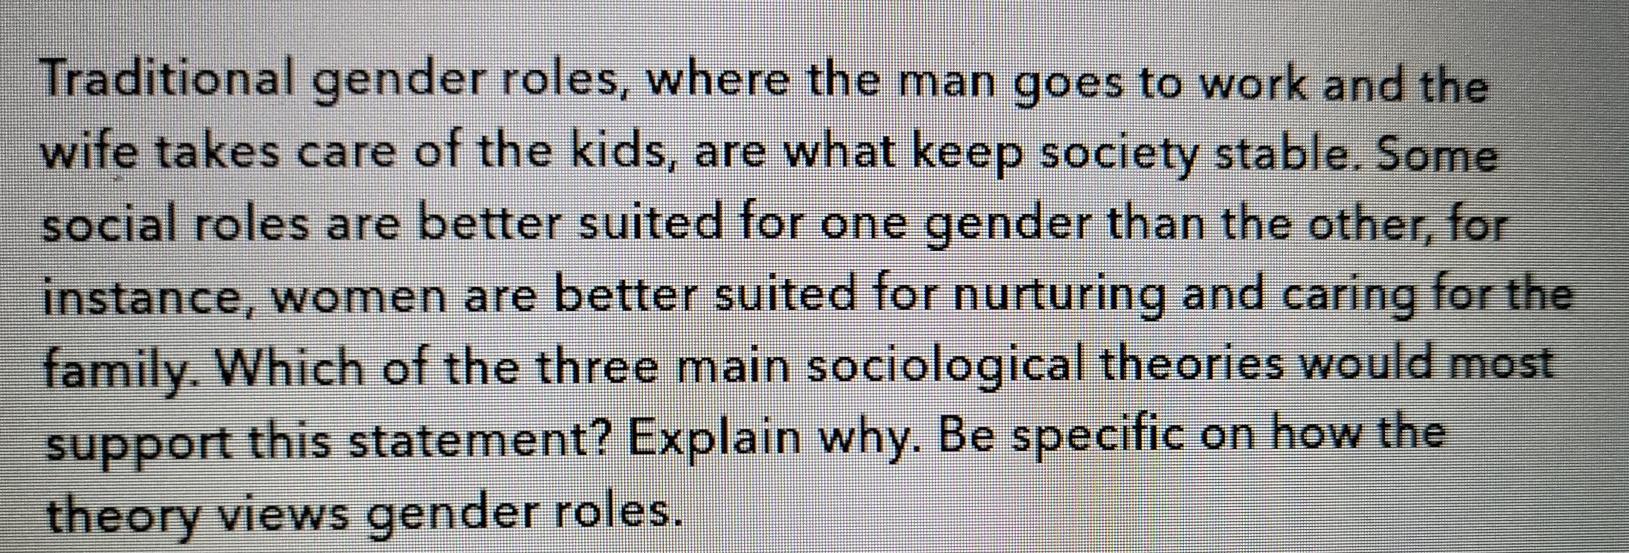 traditional gender roles in society